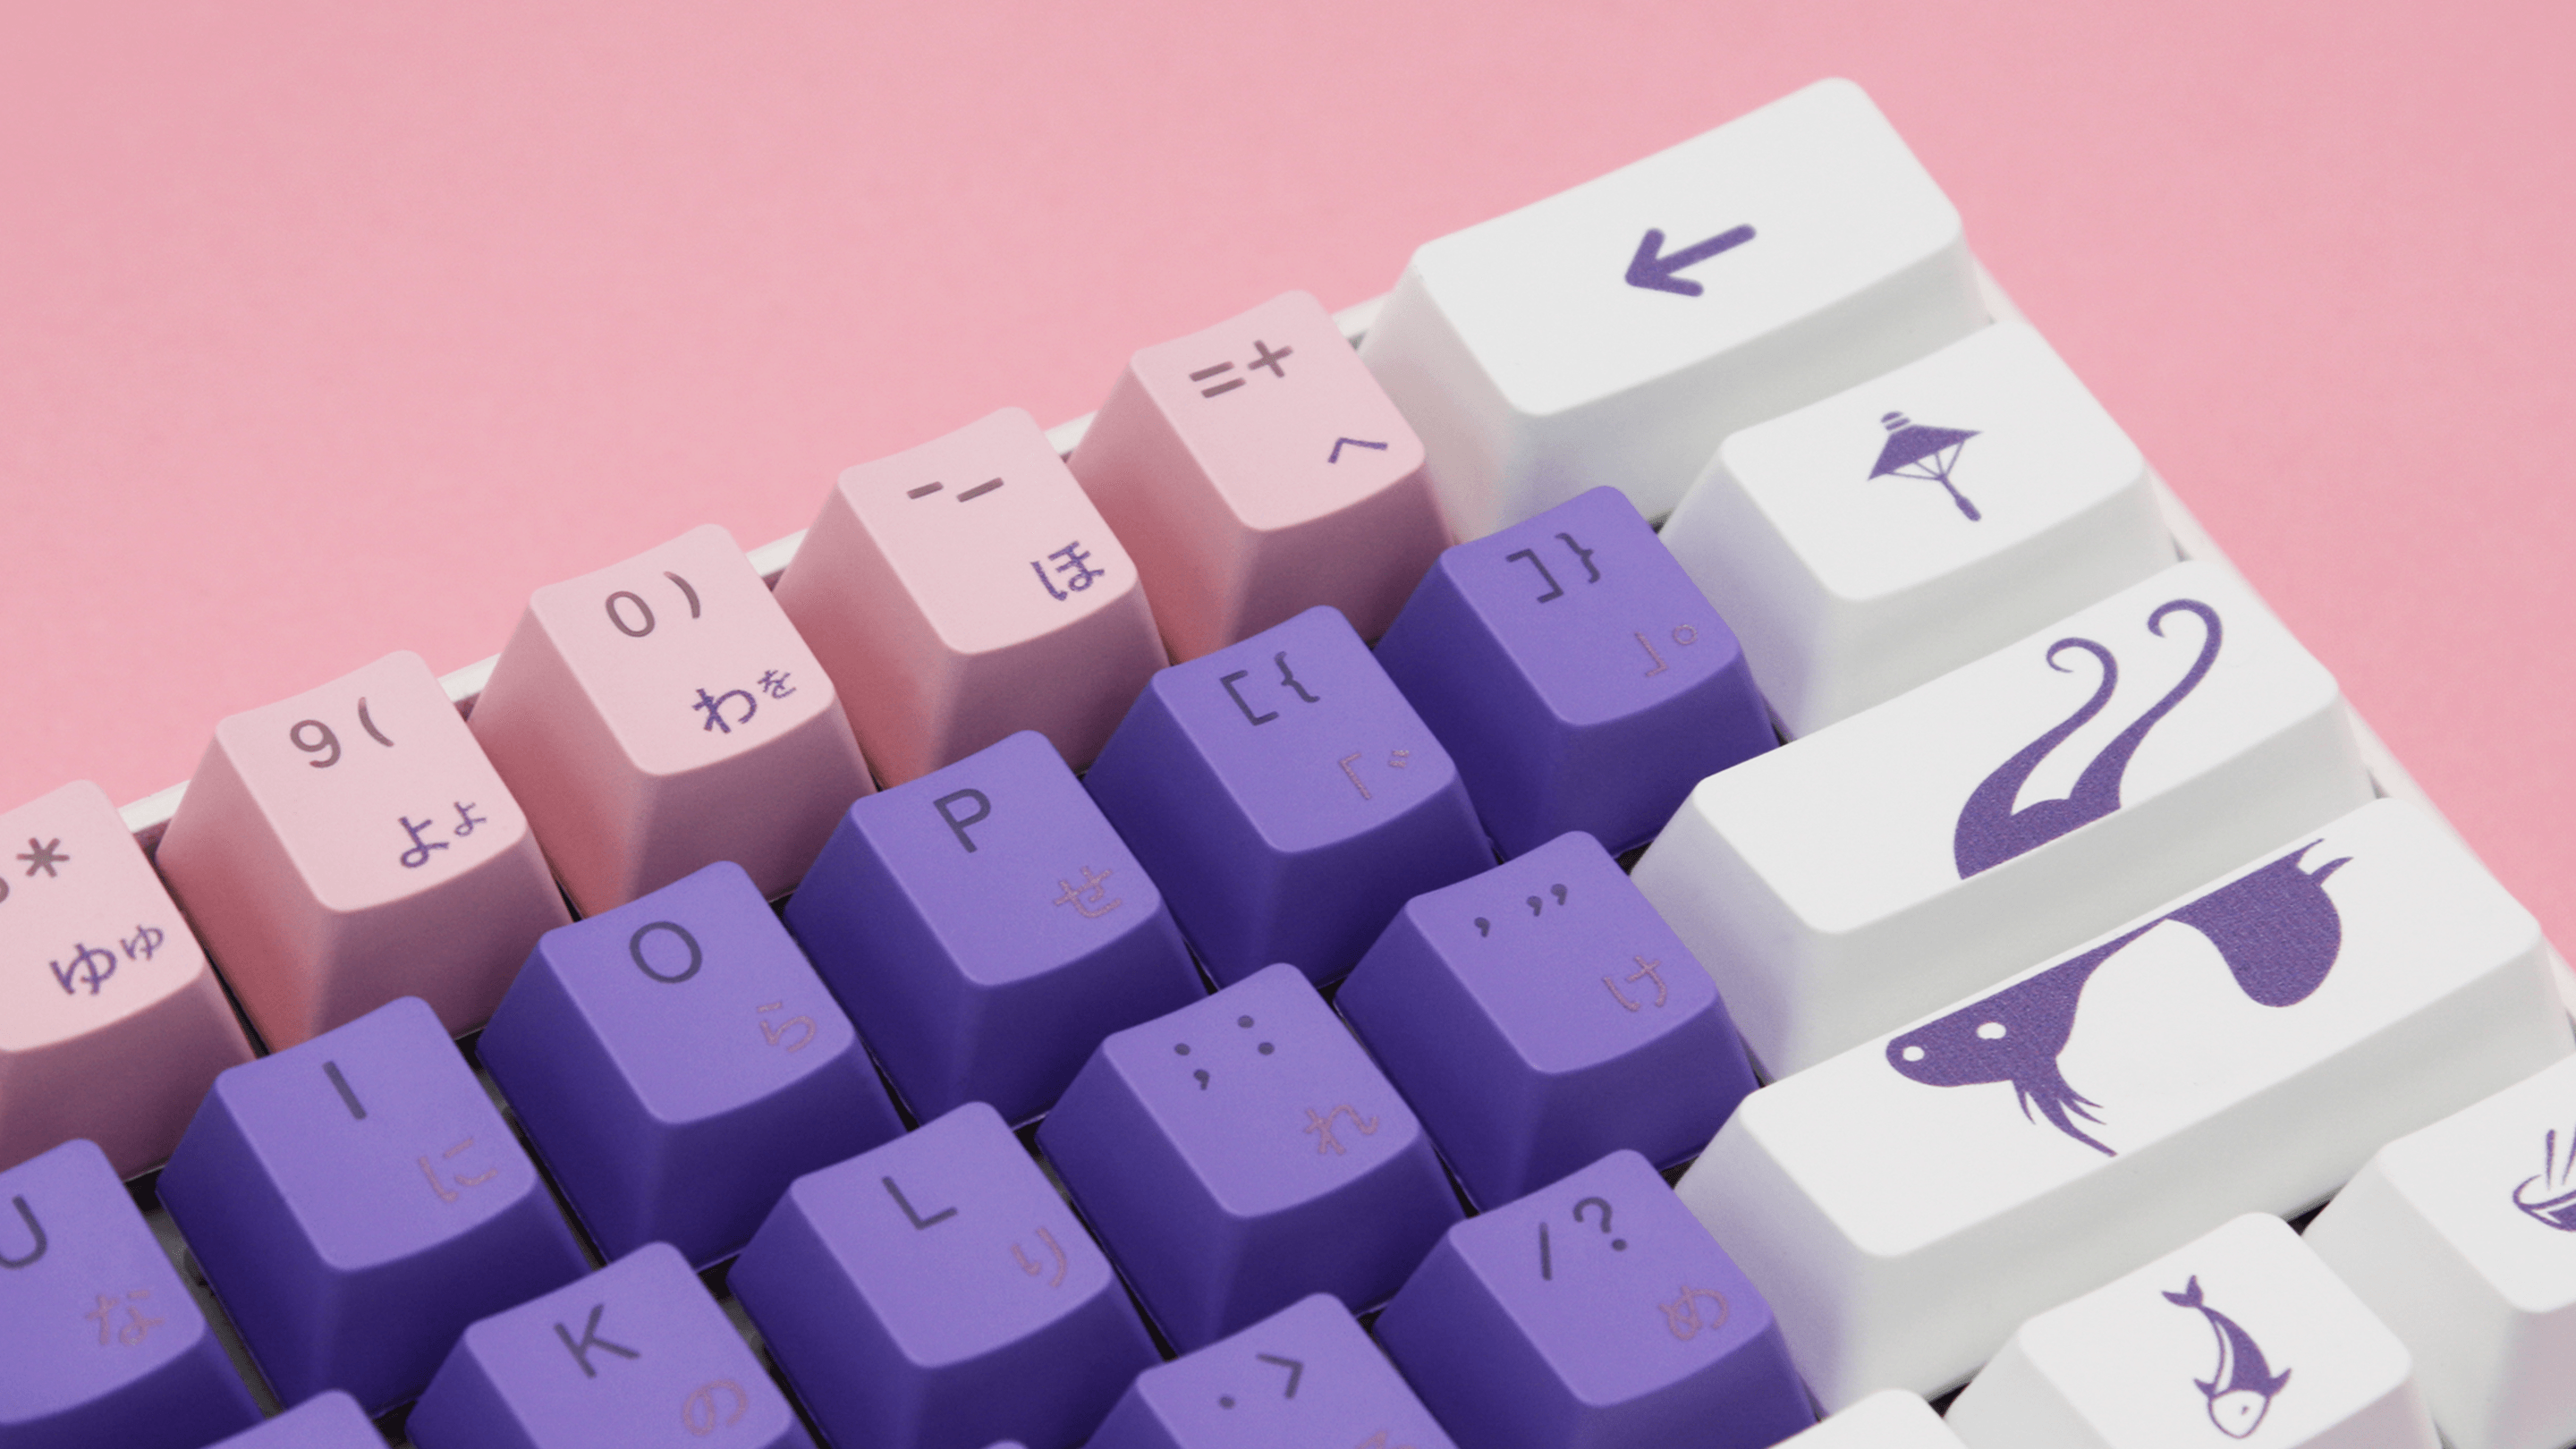 AZERTY keycaps Where to find